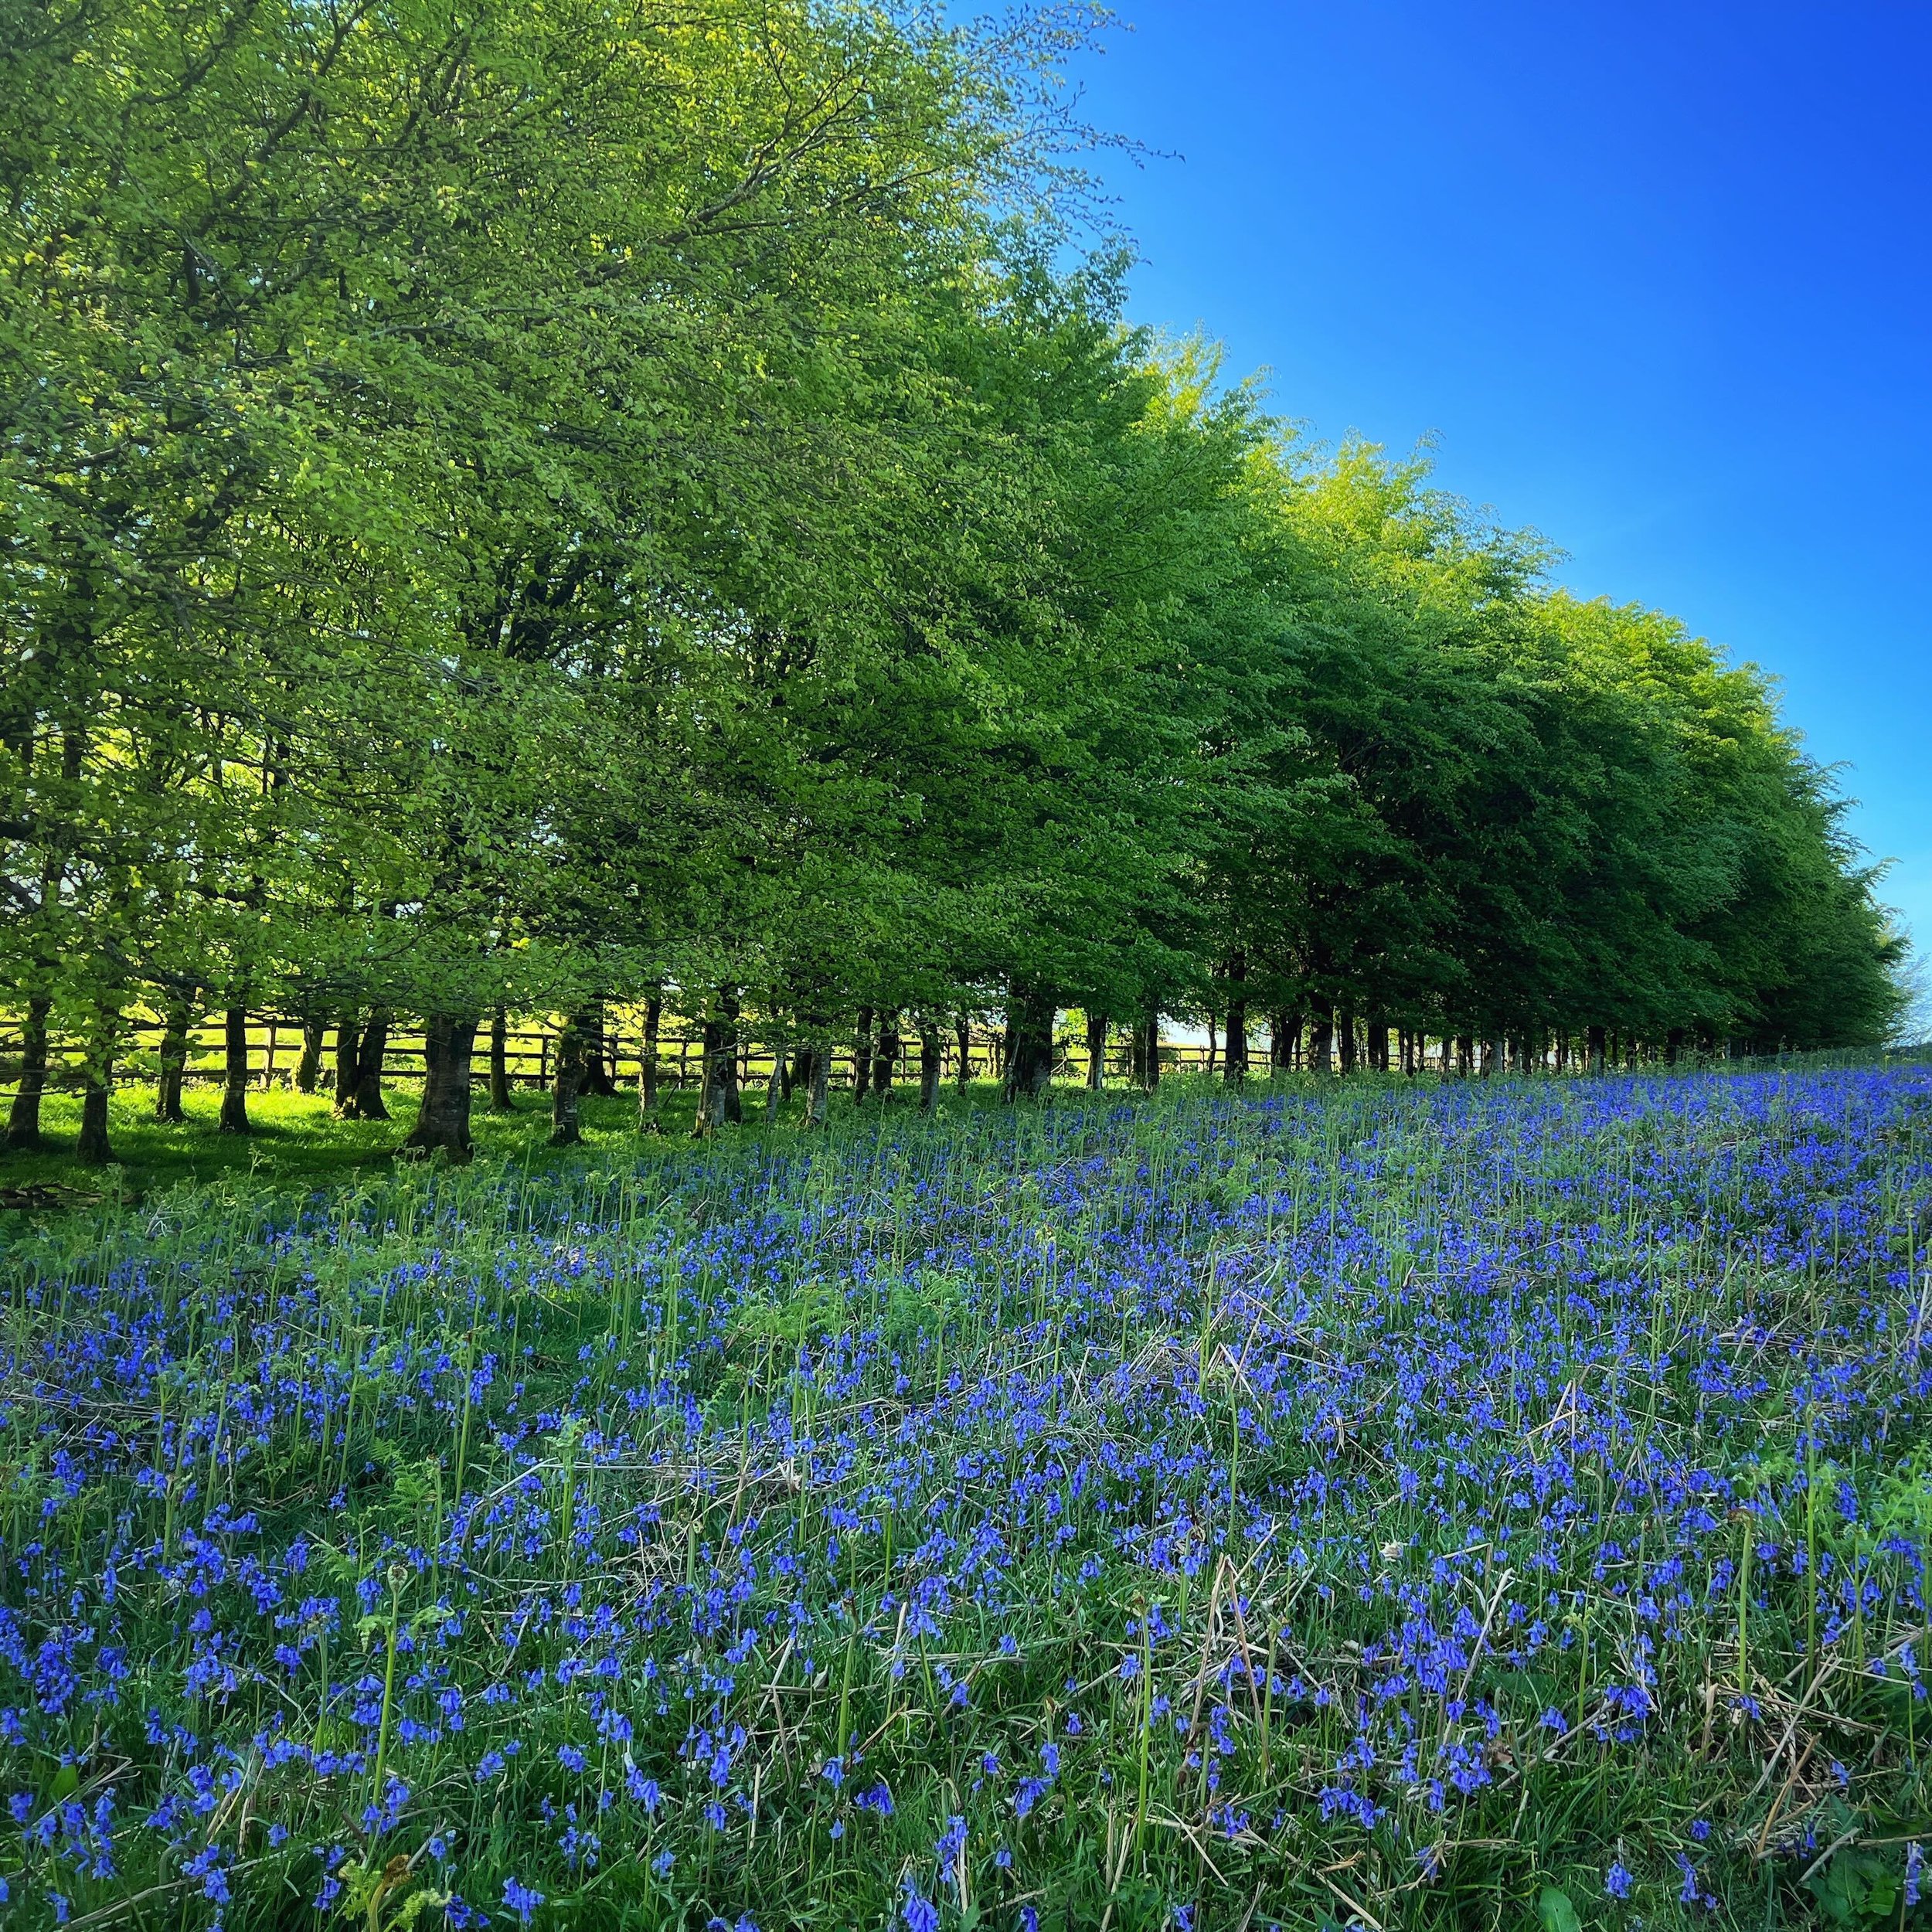 Fields of bluebells in Devon. The timing of our visit was perfect to see these in full bloom #bluebellseason